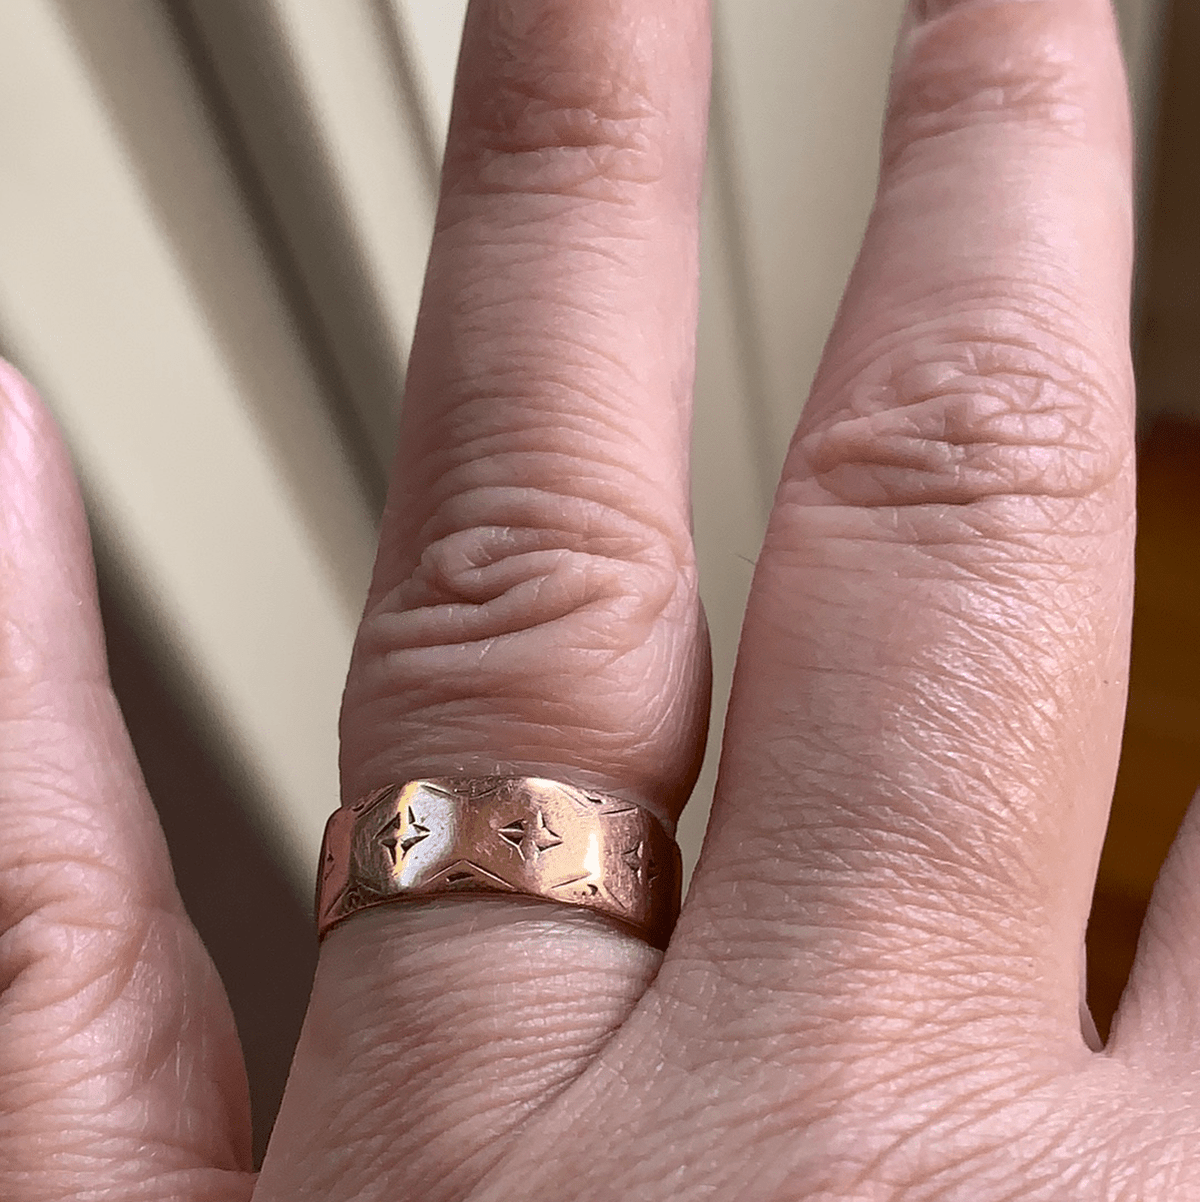 Cigar Band Monogram Ring, Personalized Jewelry